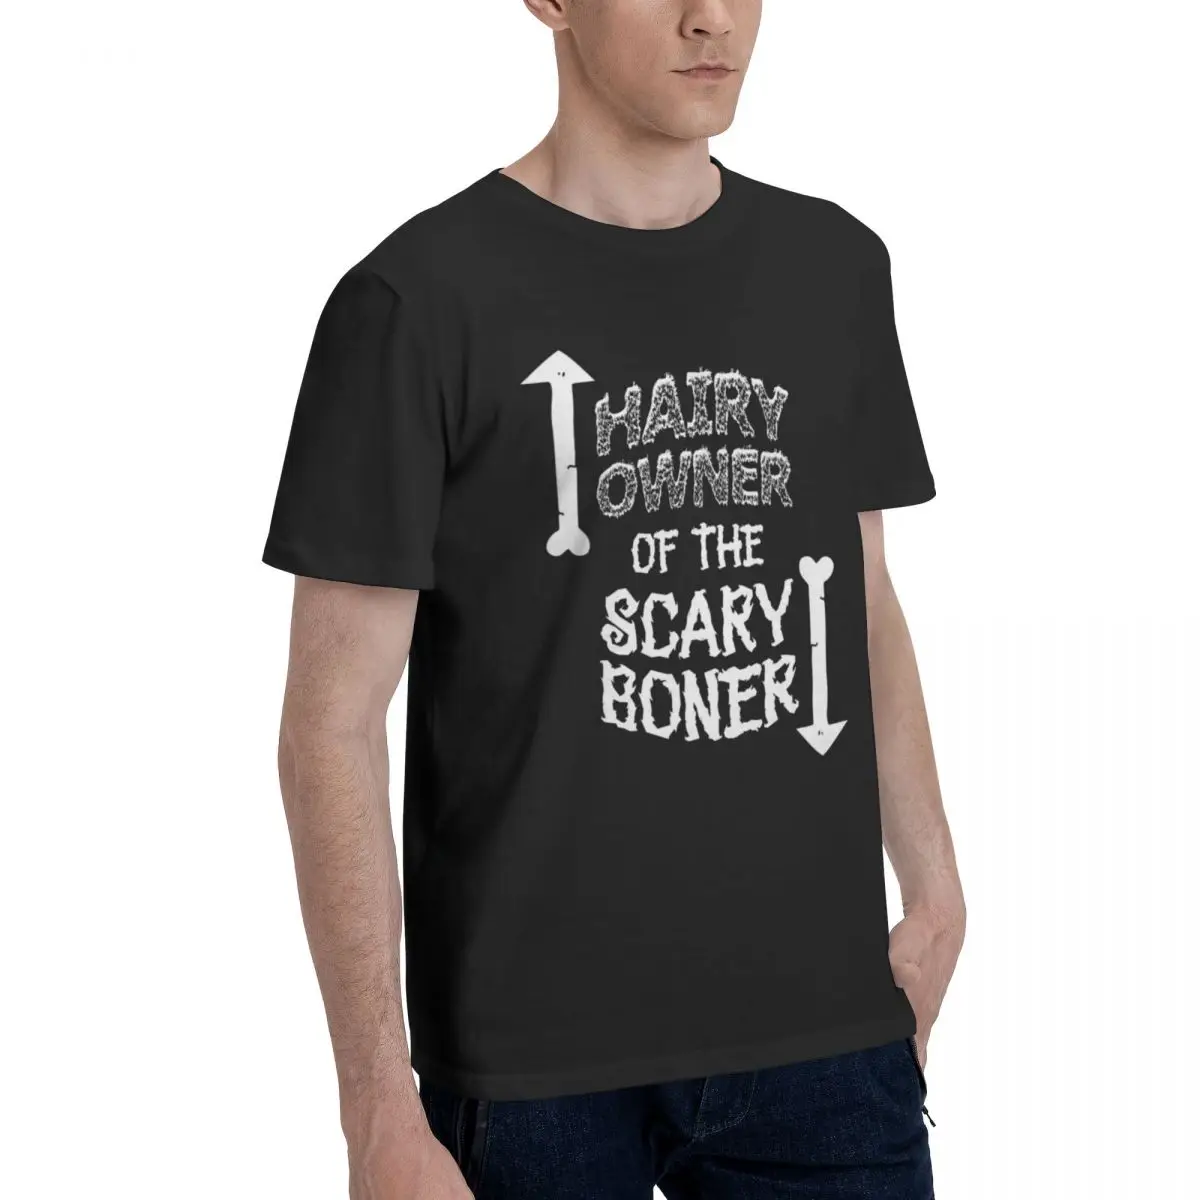 

HAIRY OWNER OF THE SCARY BONER Essential Nerdy Men's Basic Short Sleeve T-Shirt Funny activity competition Tops Tees